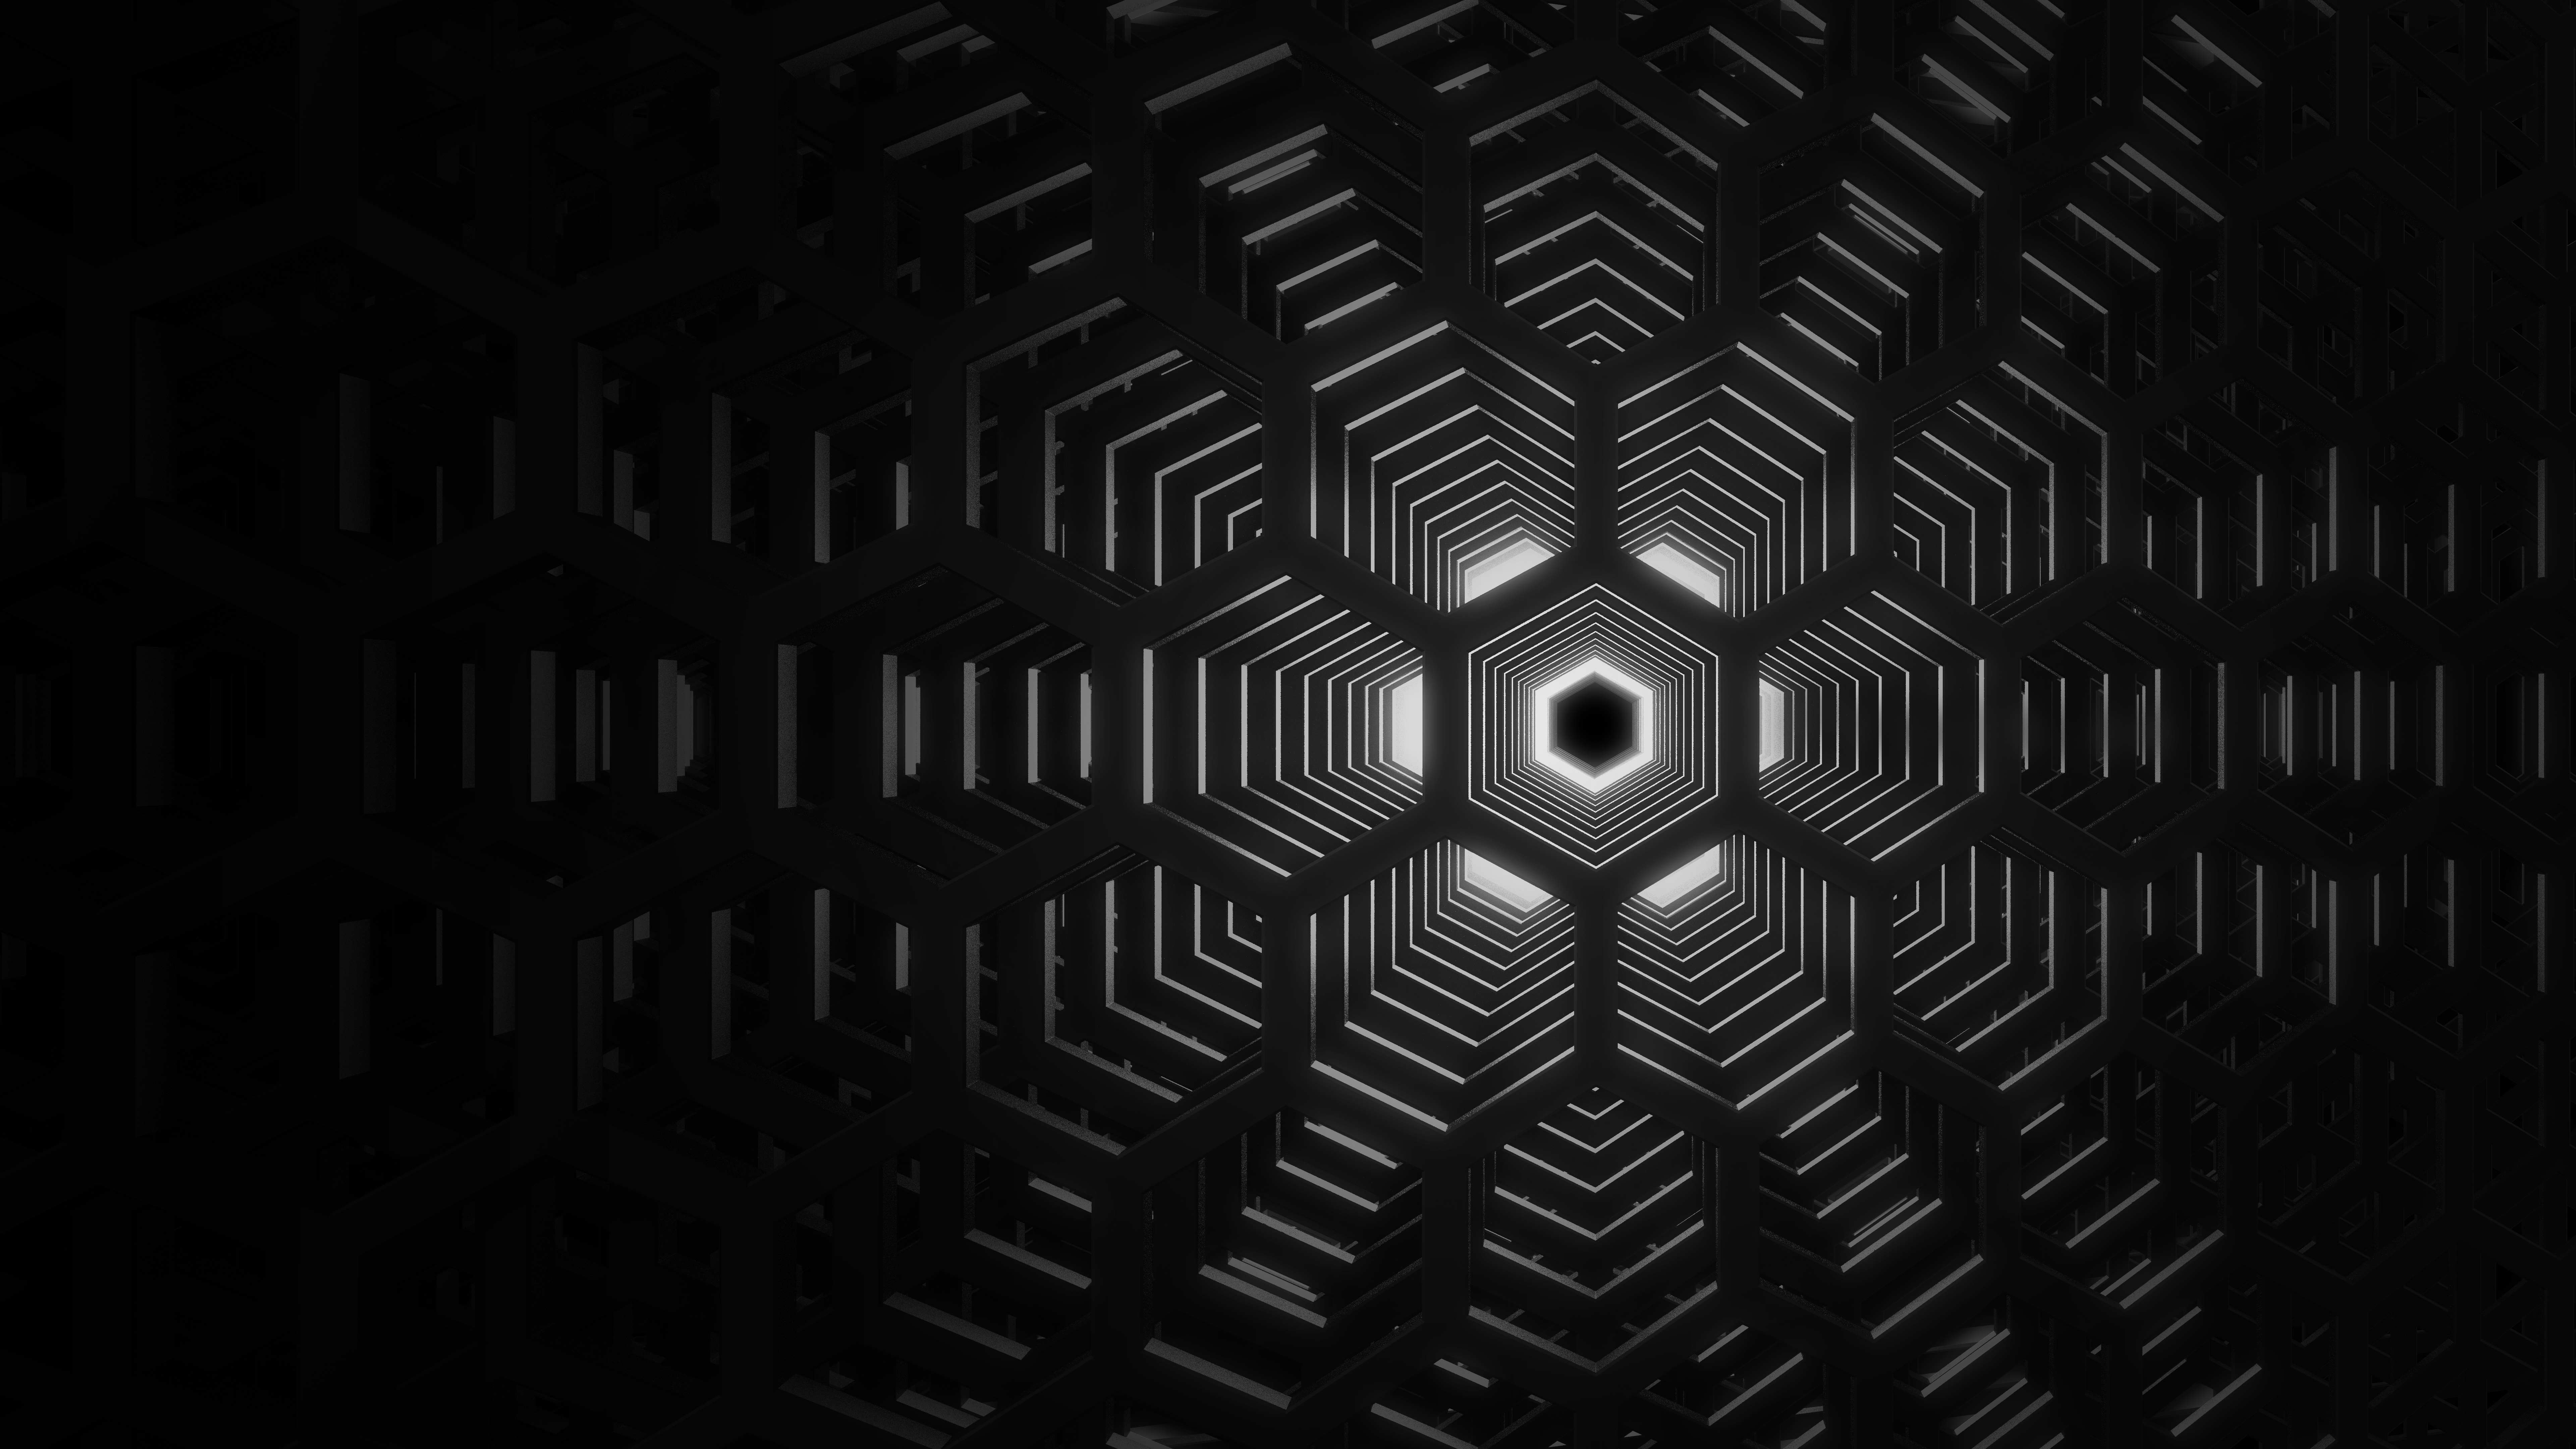 General 7680x4320 Dell abstract 3D Abstract dark background pentagons